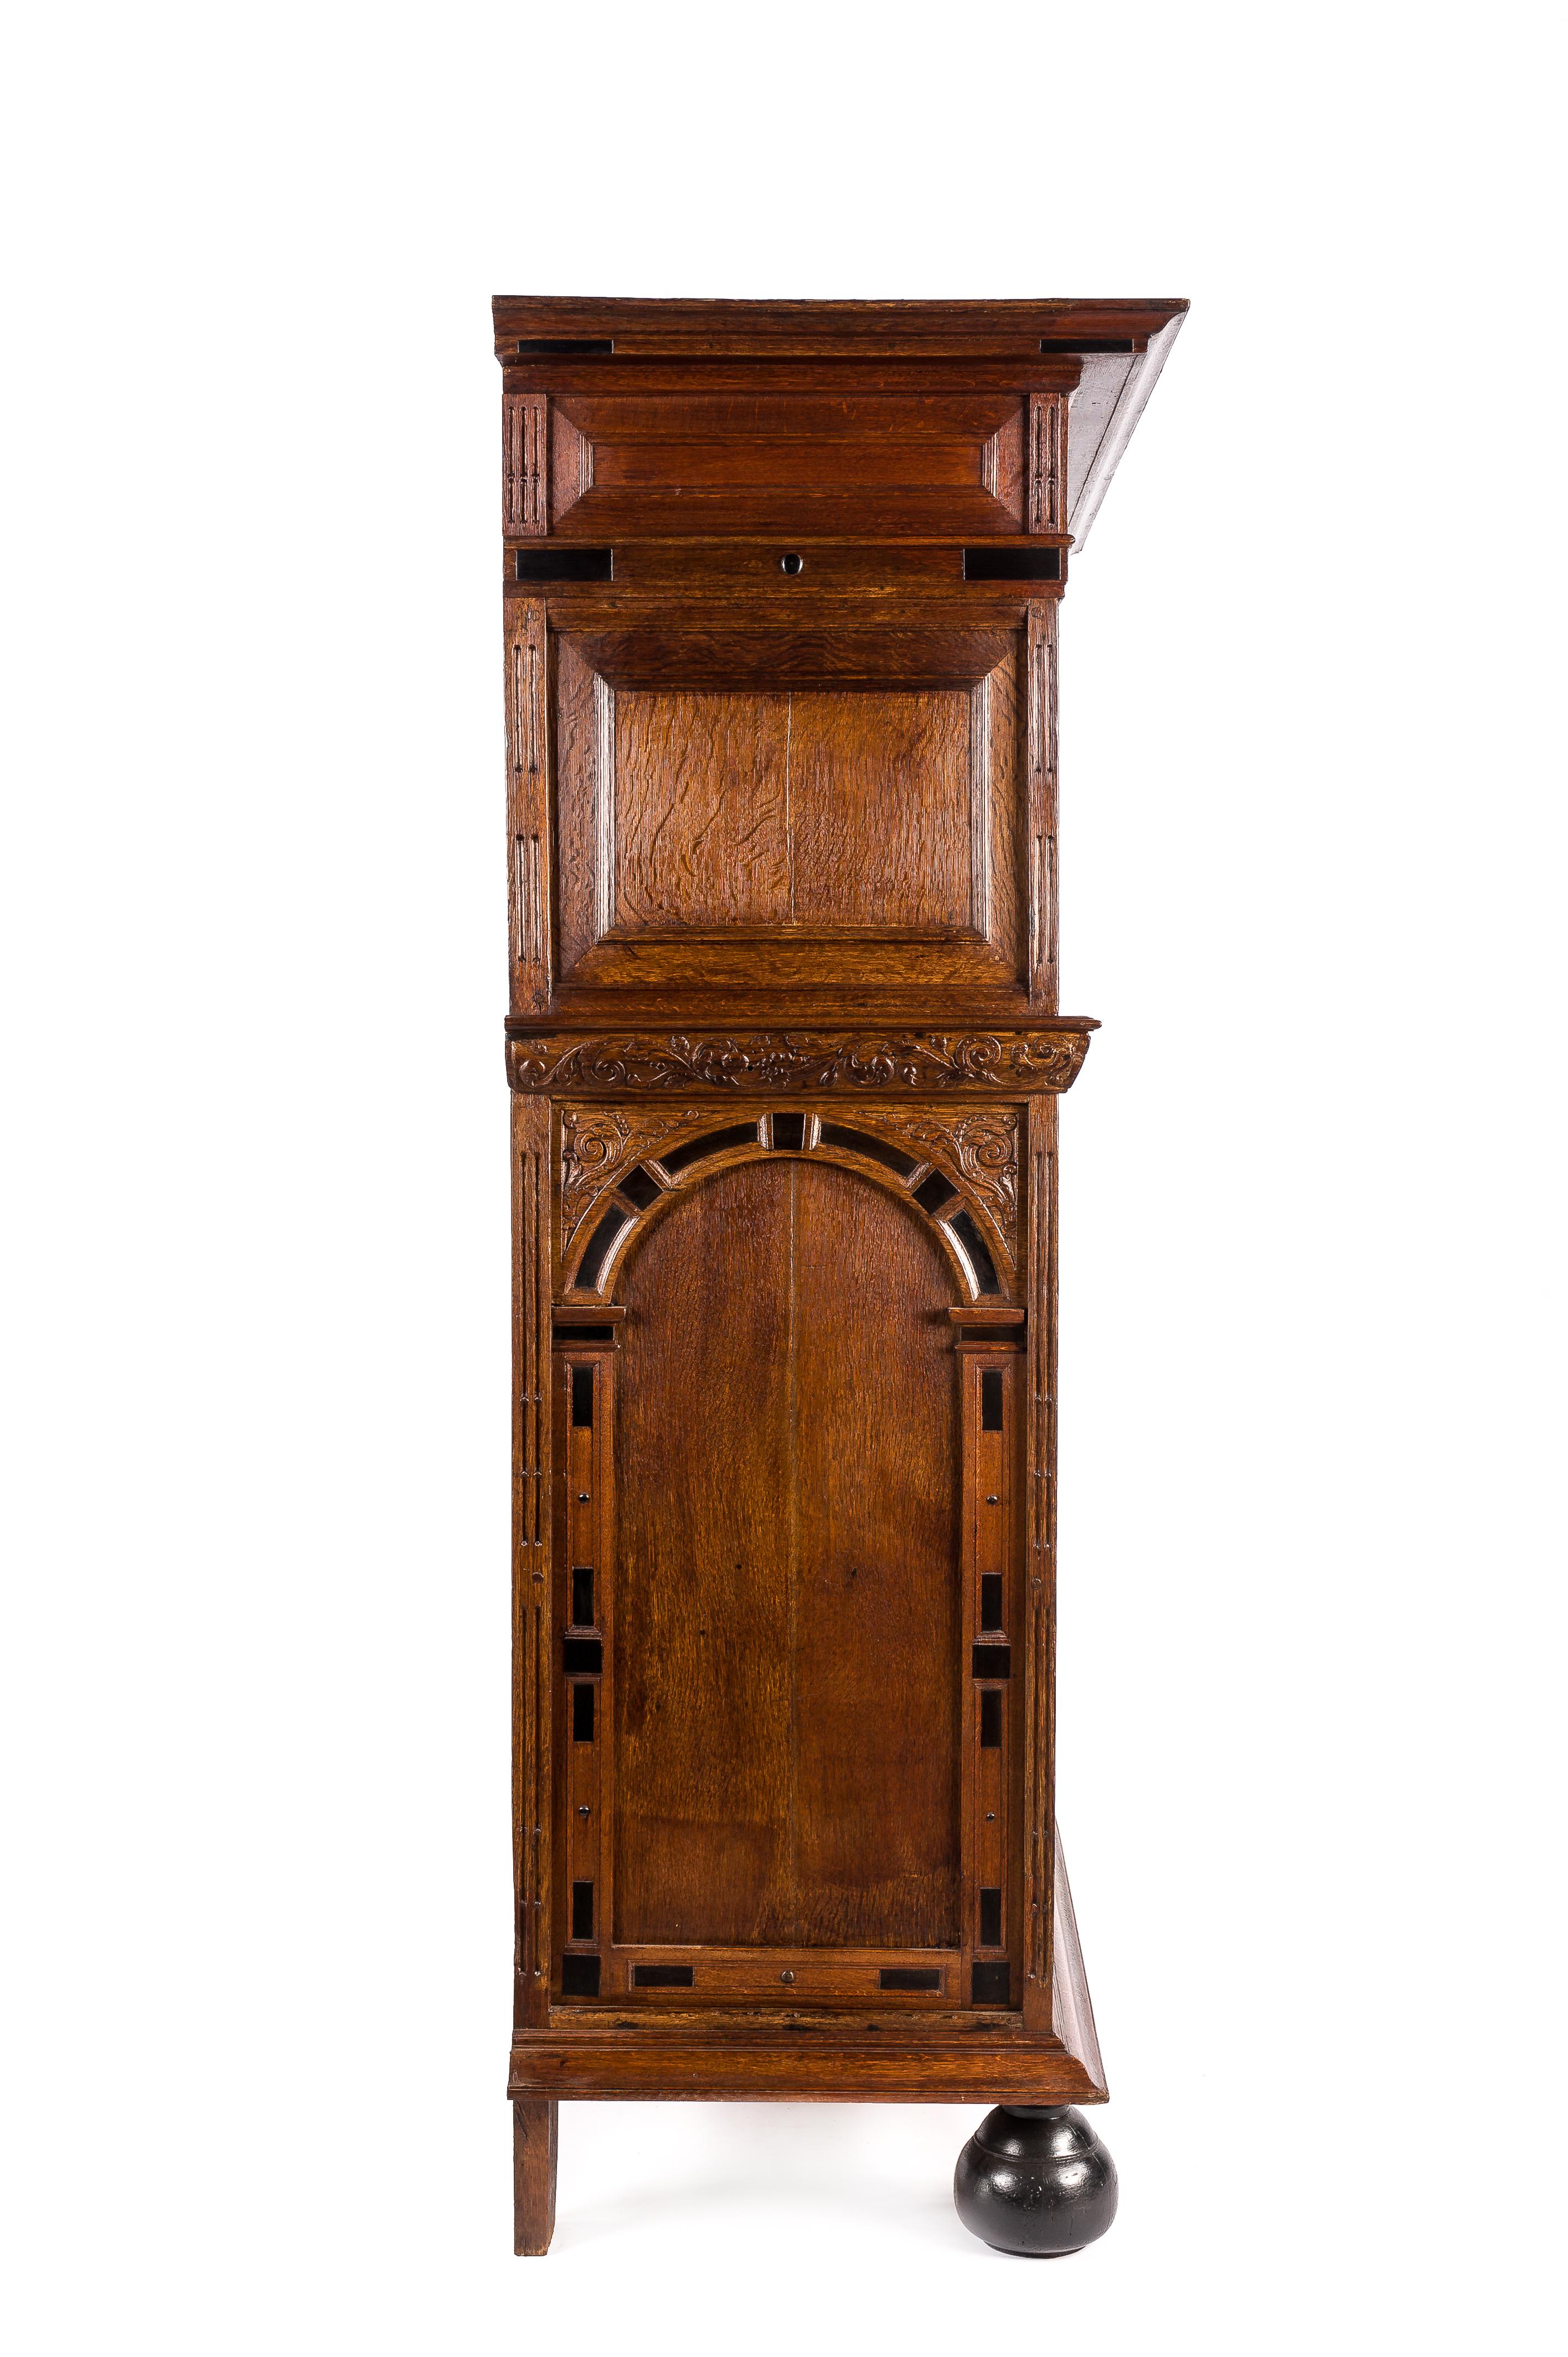 Hand-Carved 17th Century Dutch Renaissance Oak and Ebony Inlay Four-Door Cabinet Dated 1660 For Sale